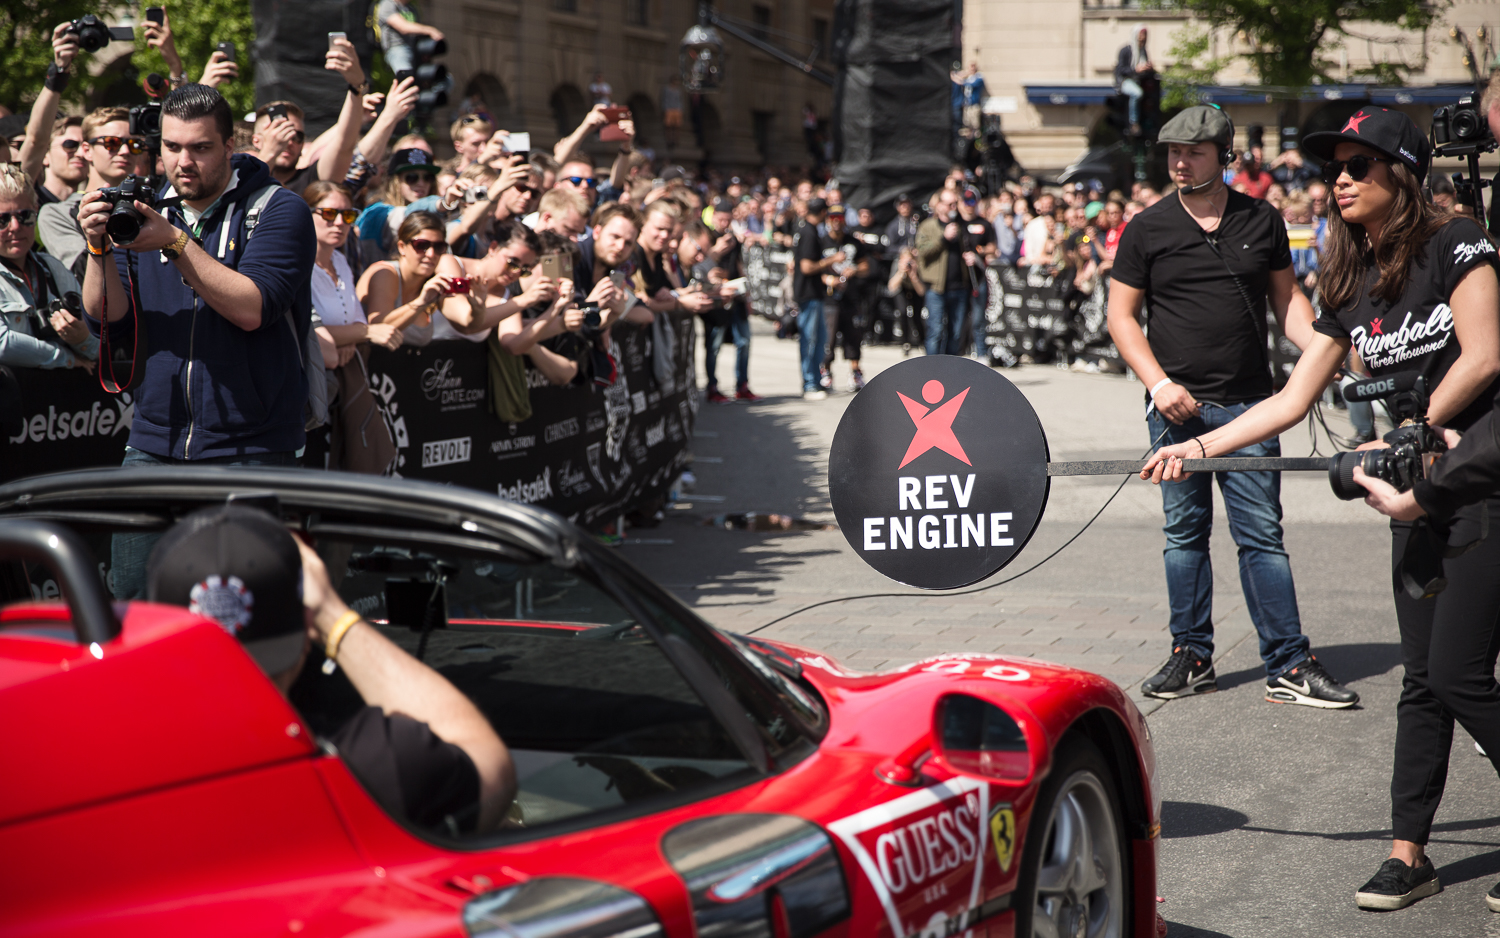 SMoores_15-05-24_Gumball 3000 Day 1_0819-Edit.jpg